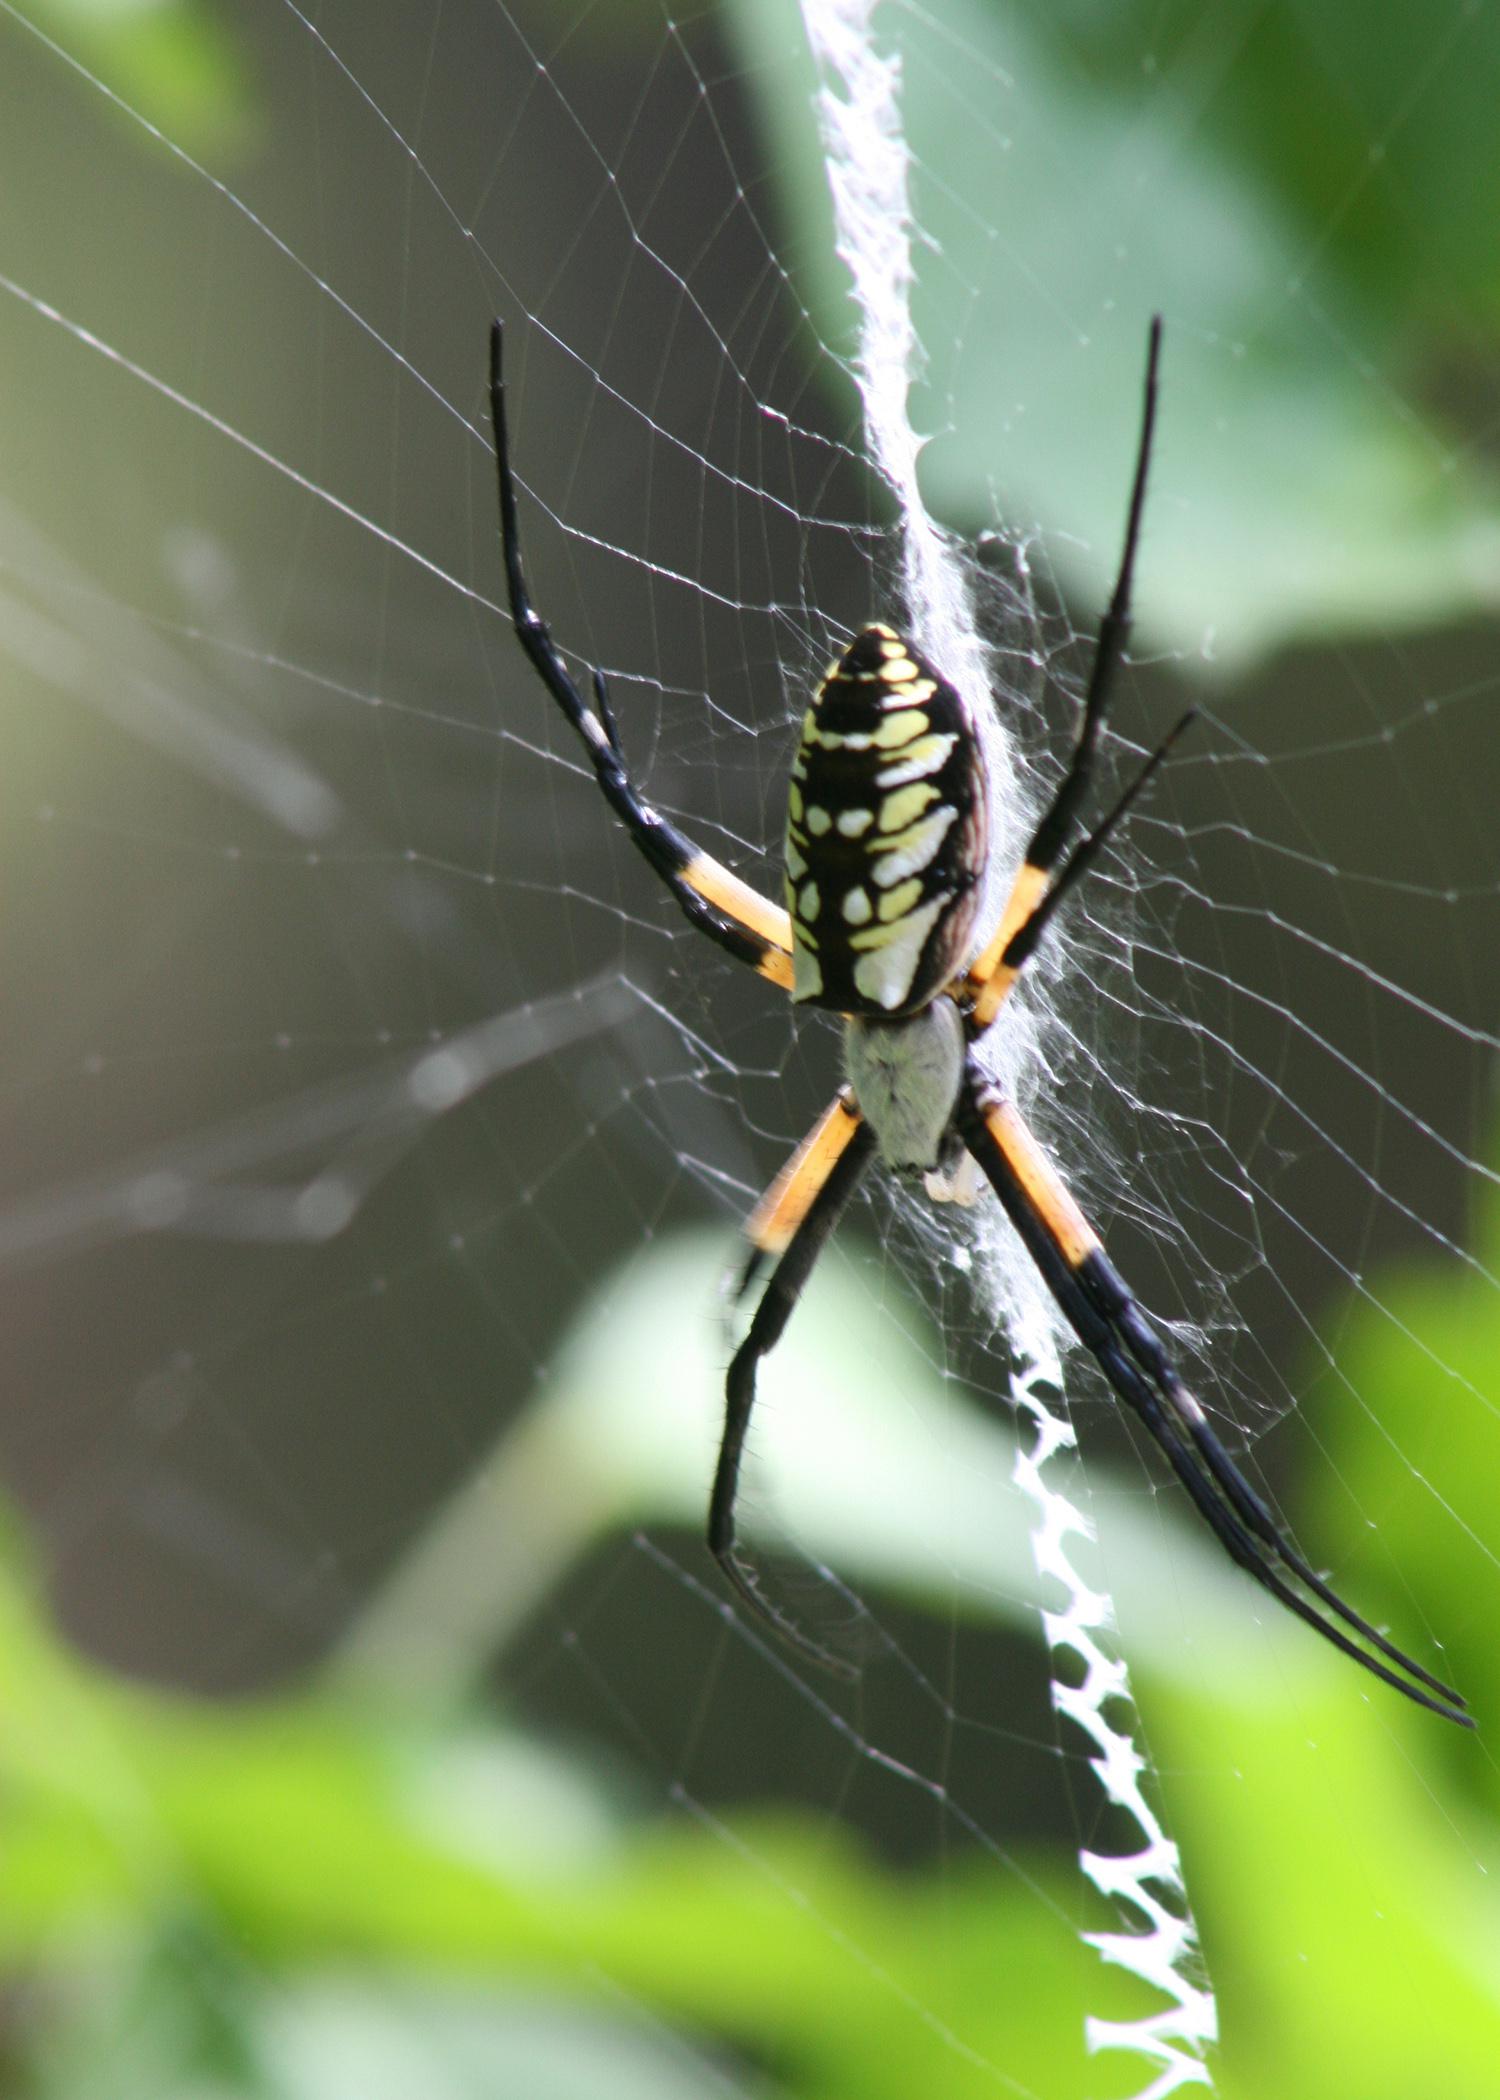 Spiders such as this zipper or banana spider consume massive quantities of insects, but most are not pests in Mississippi gardens and landscapes. (Photo by MSU Ag Communications/Kat Lawrence)